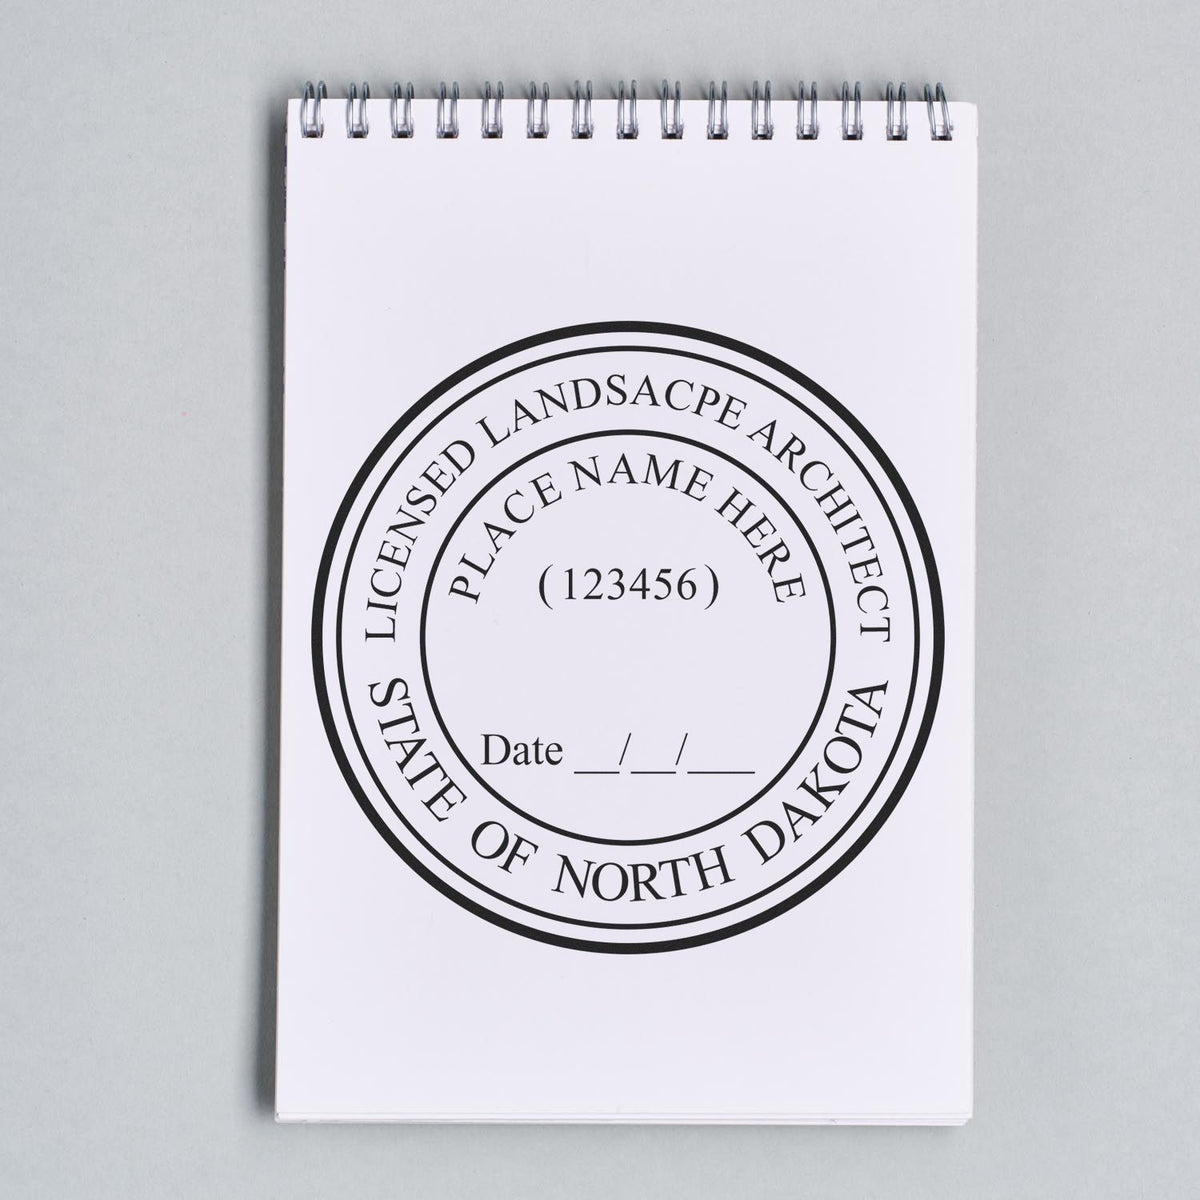 A lifestyle photo showing a stamped image of the North Dakota Landscape Architectural Seal Stamp on a piece of paper